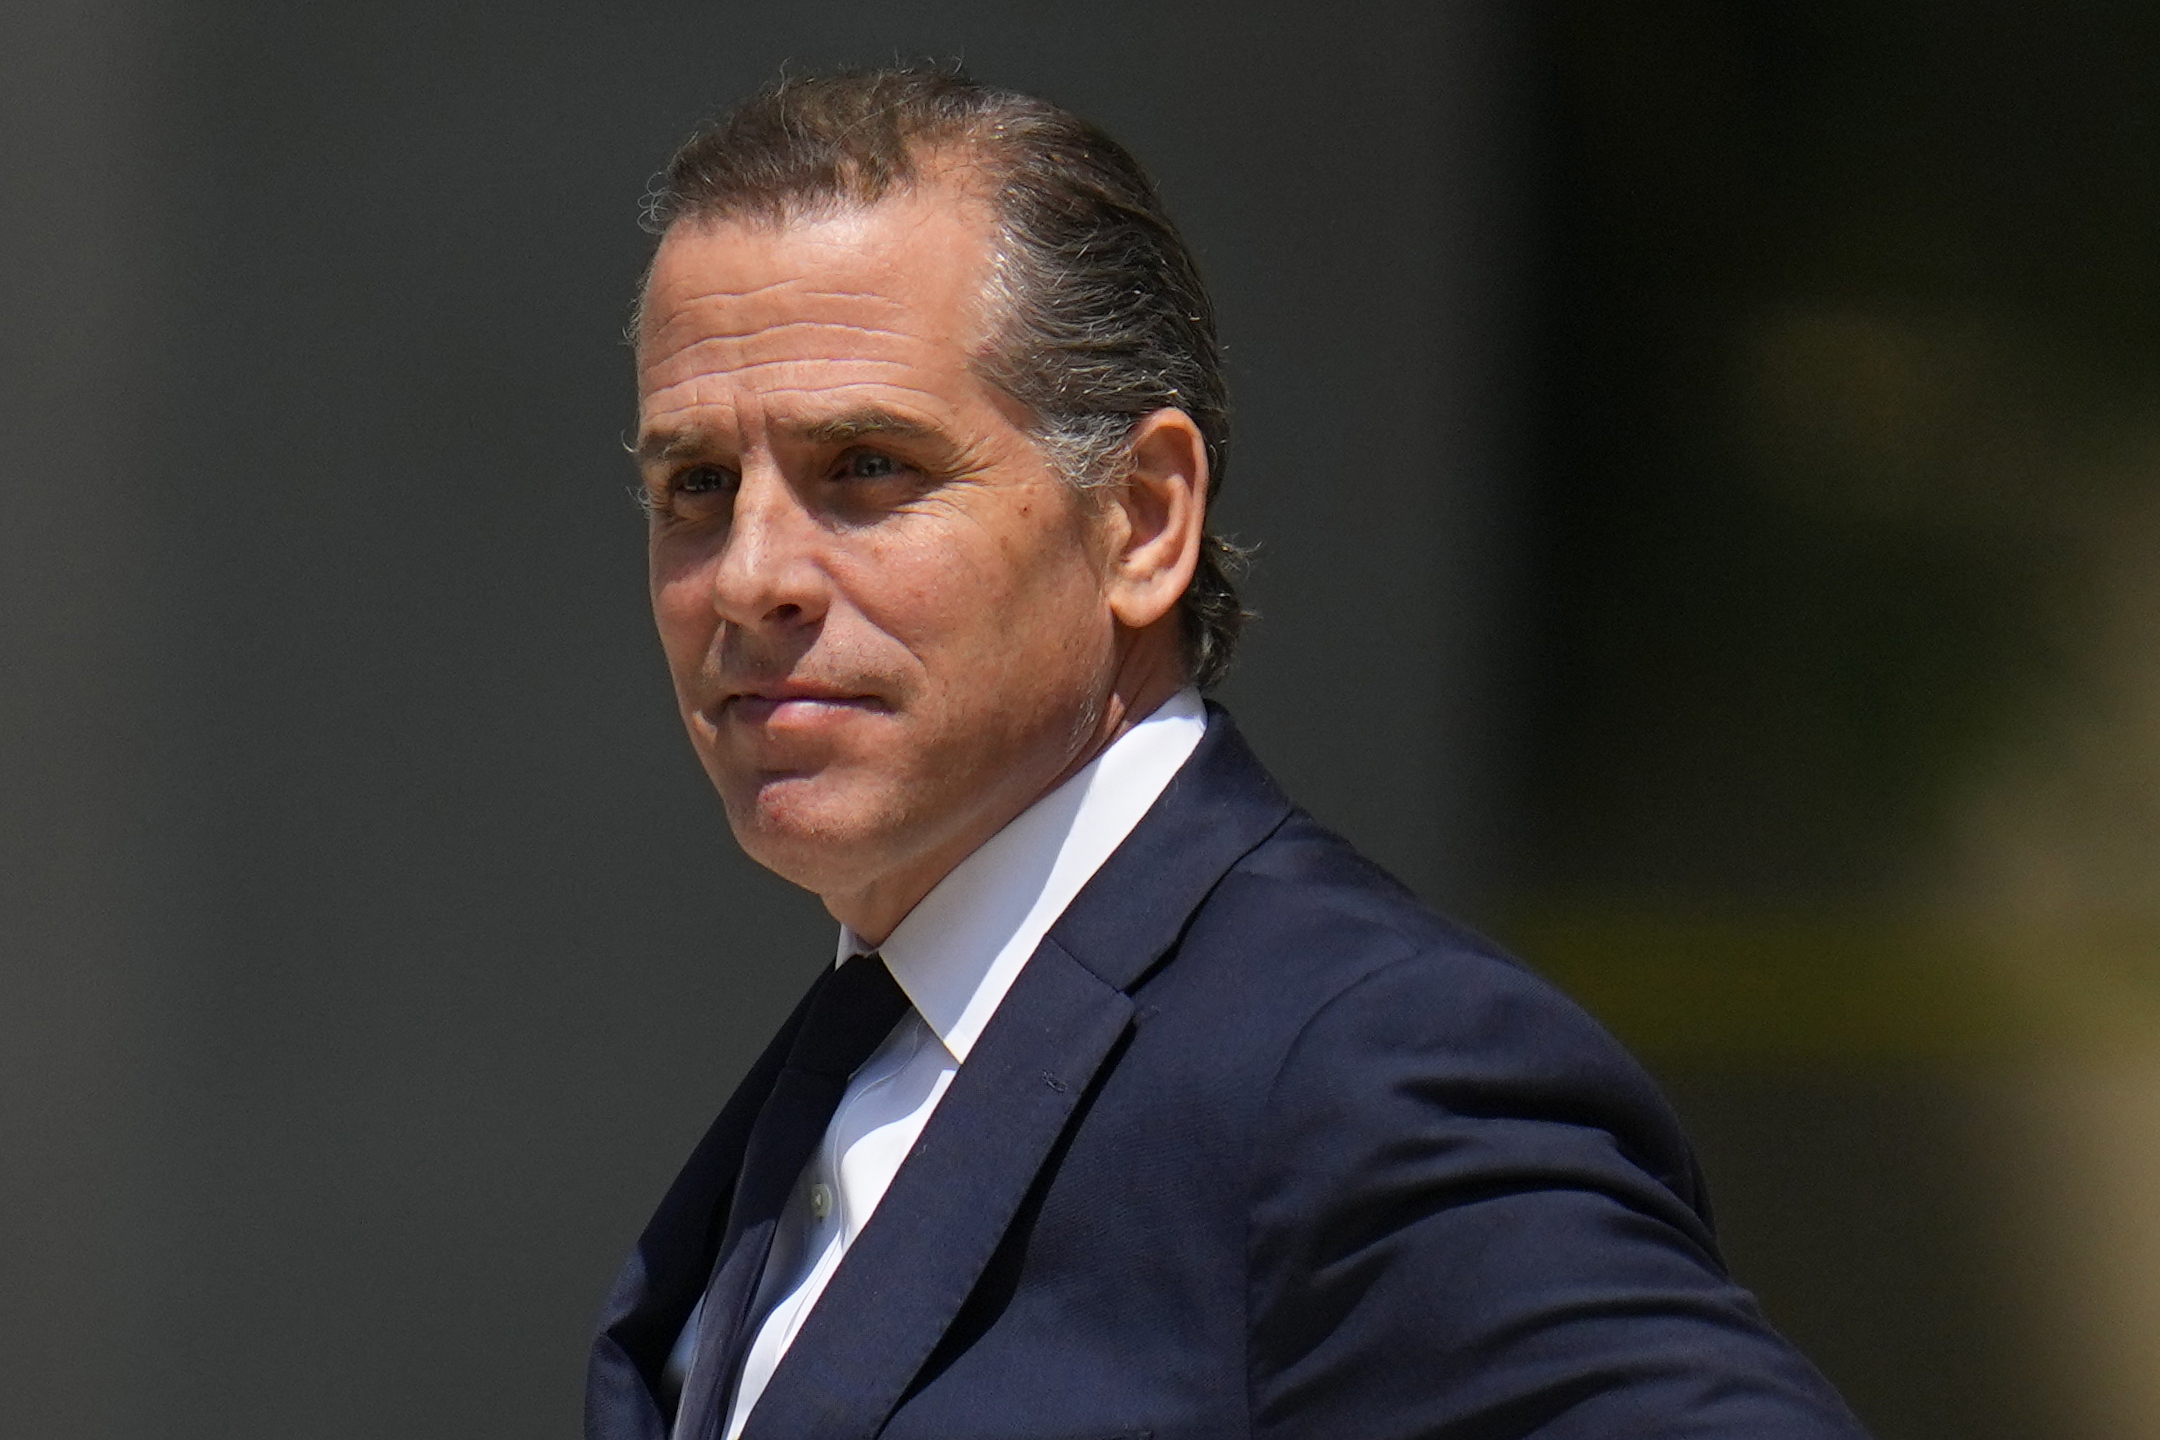 Hunter Biden indicted on federal firearms charges in long-running probe weeks after plea deal failed